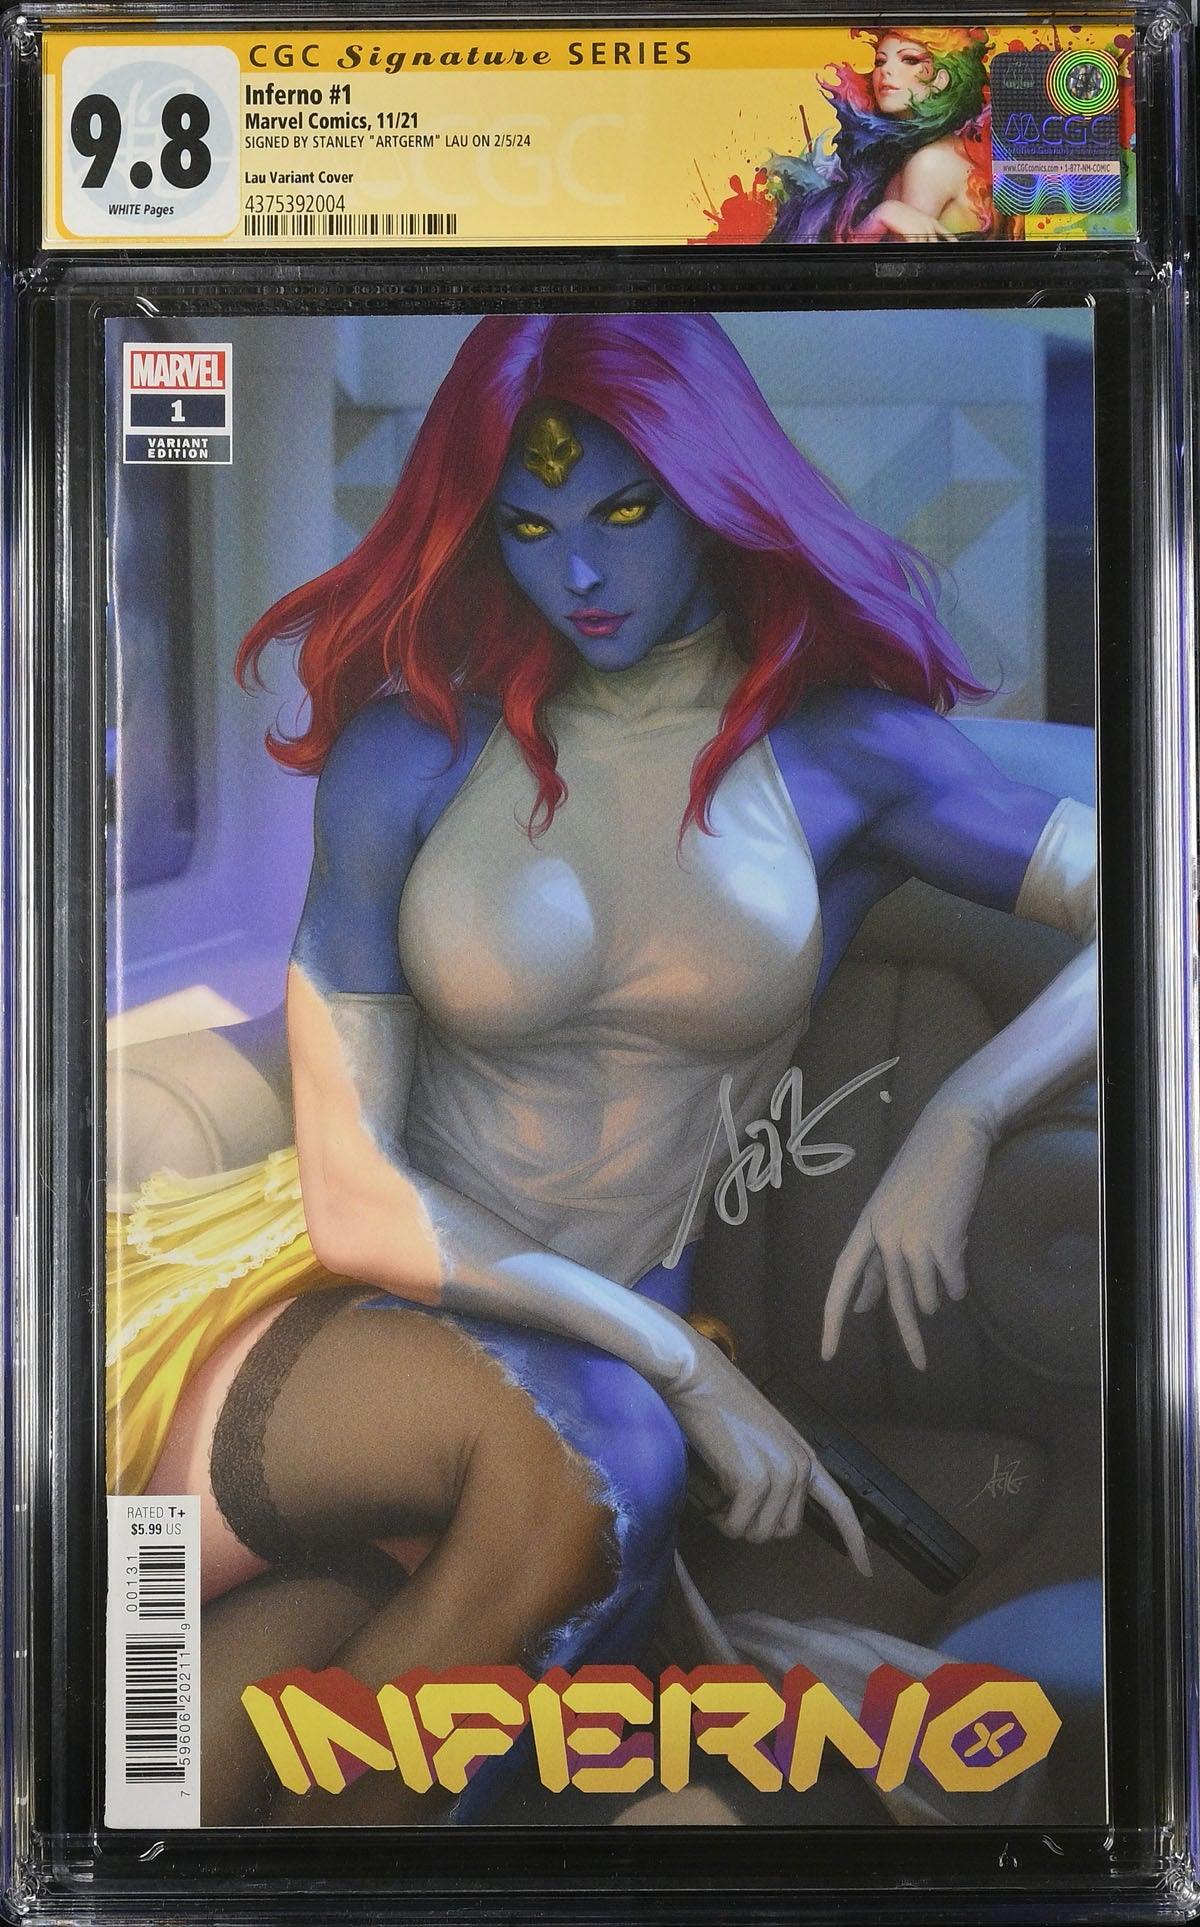 CGC INFERNO VOL 2 #1 LAU VARIANT (9.8) SIGNATURE SERIES - SIGNED BY STANLEY "ARTGERM" LAU - Kings Comics